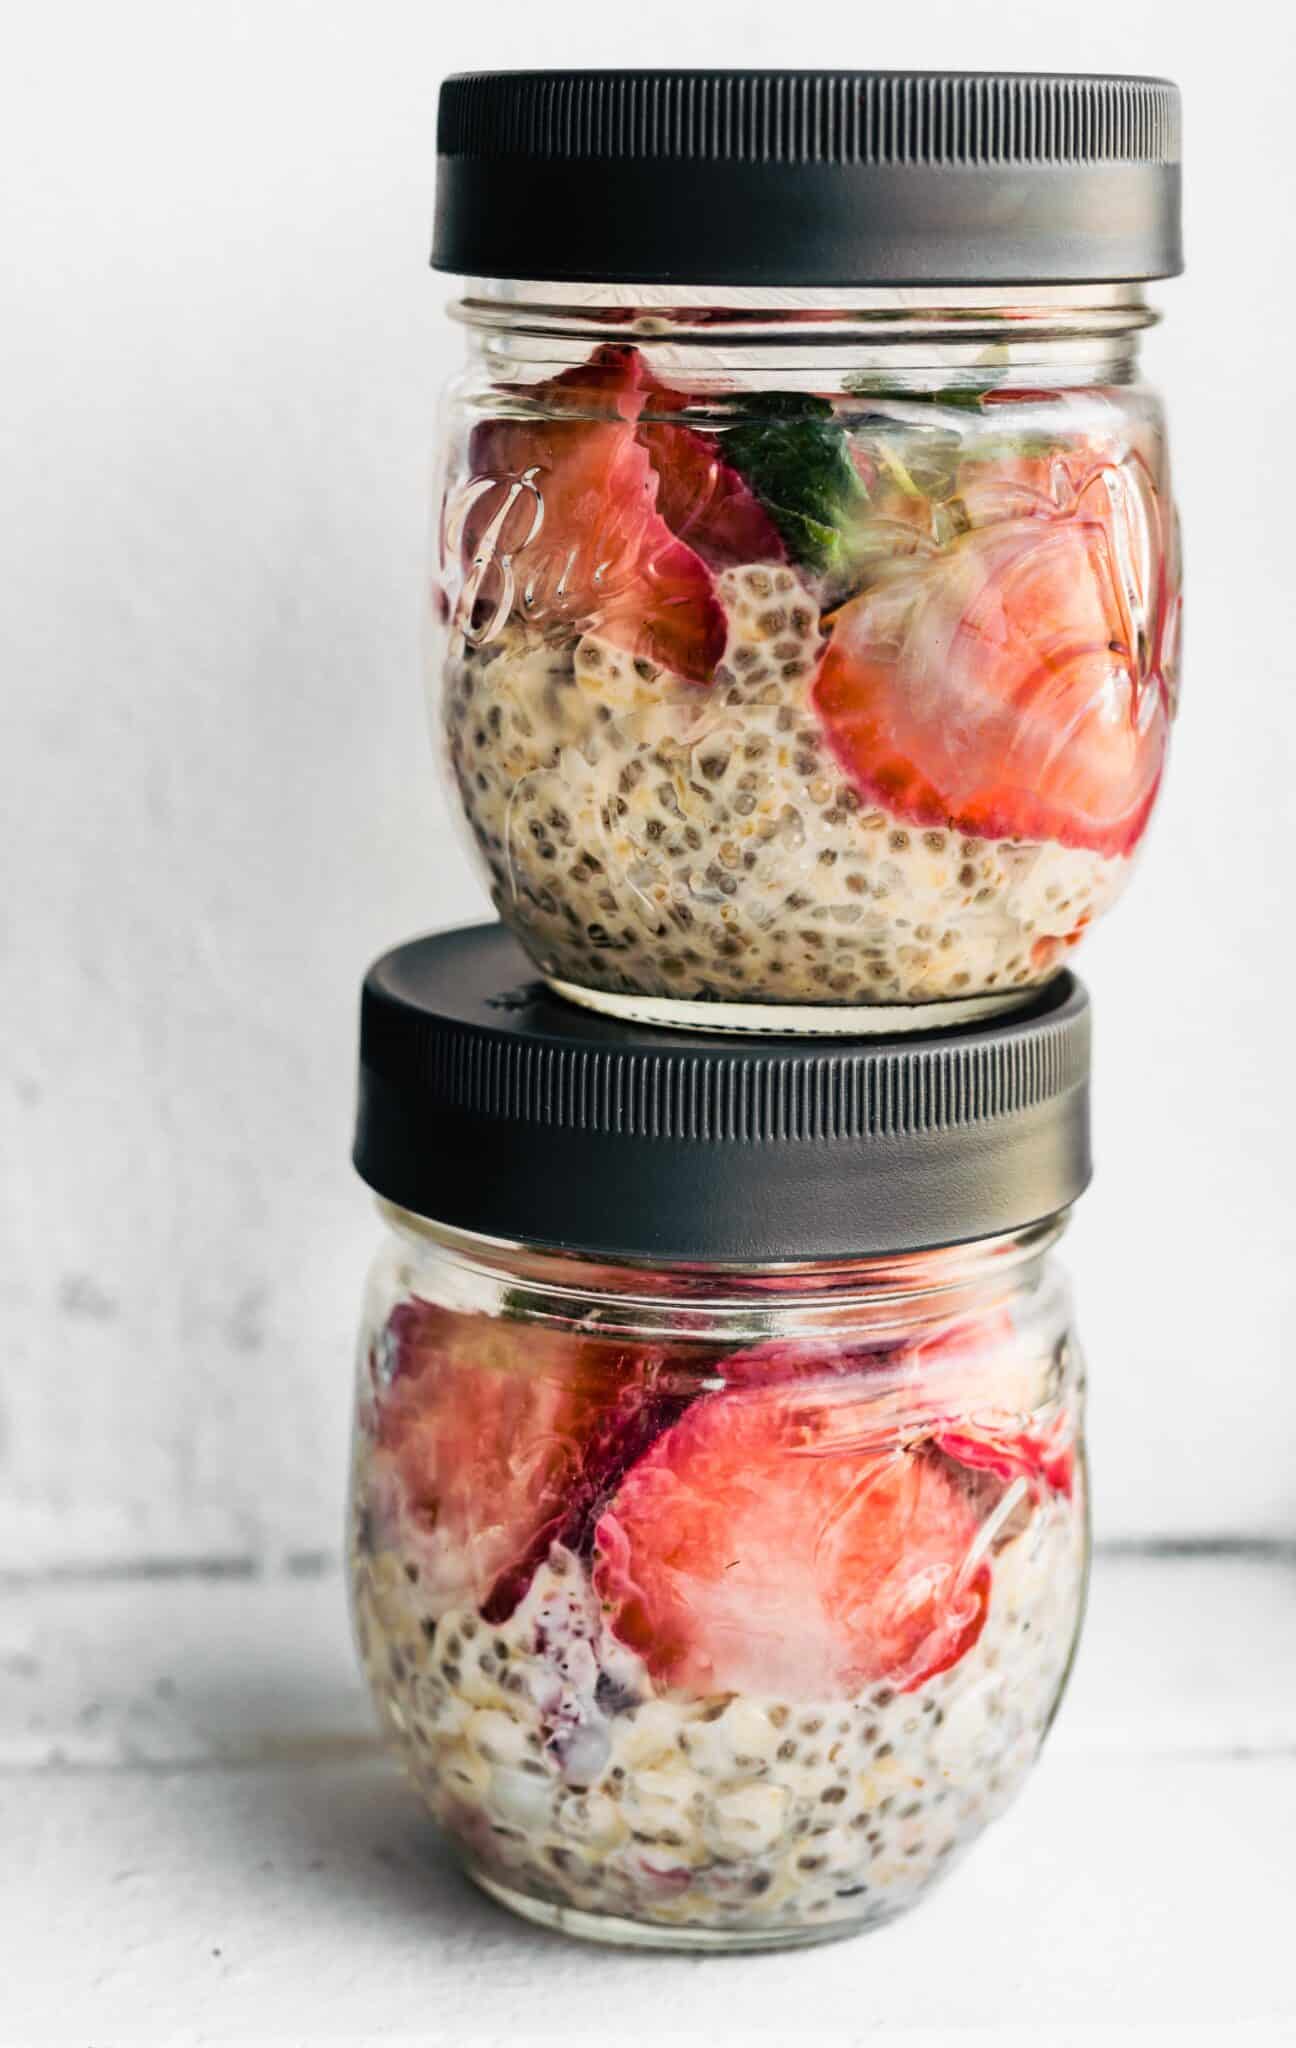 Strawberry overnight oats in two jars with black lids stacked on top of each other.